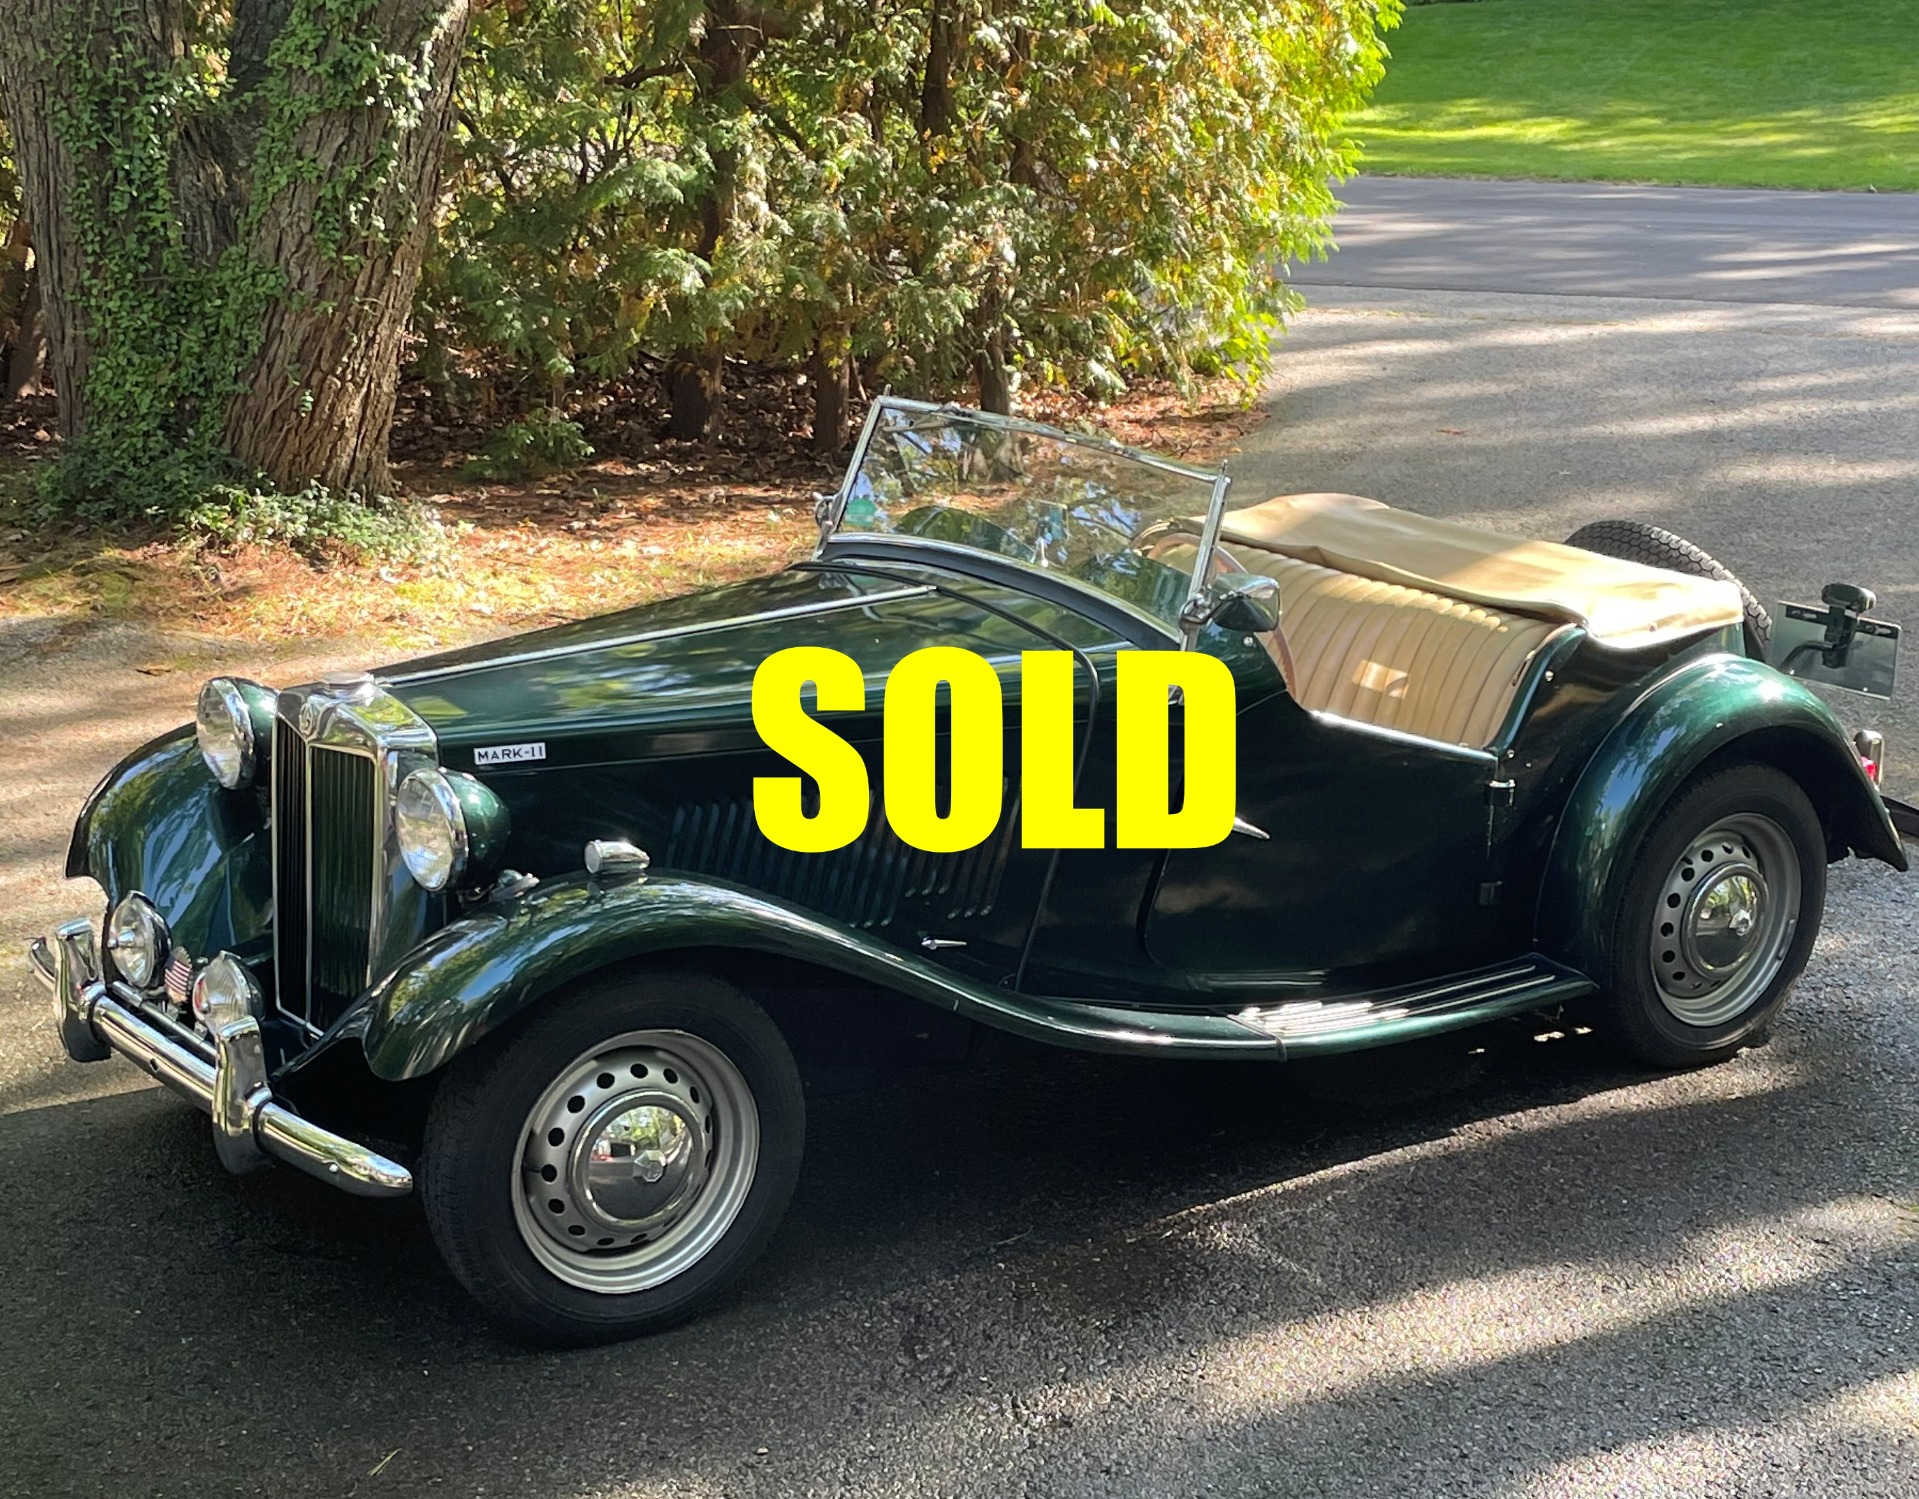 Used 1953 MGTD Mark II Competition  219 , For Sale $29500, Call Us: (704) 996-3735